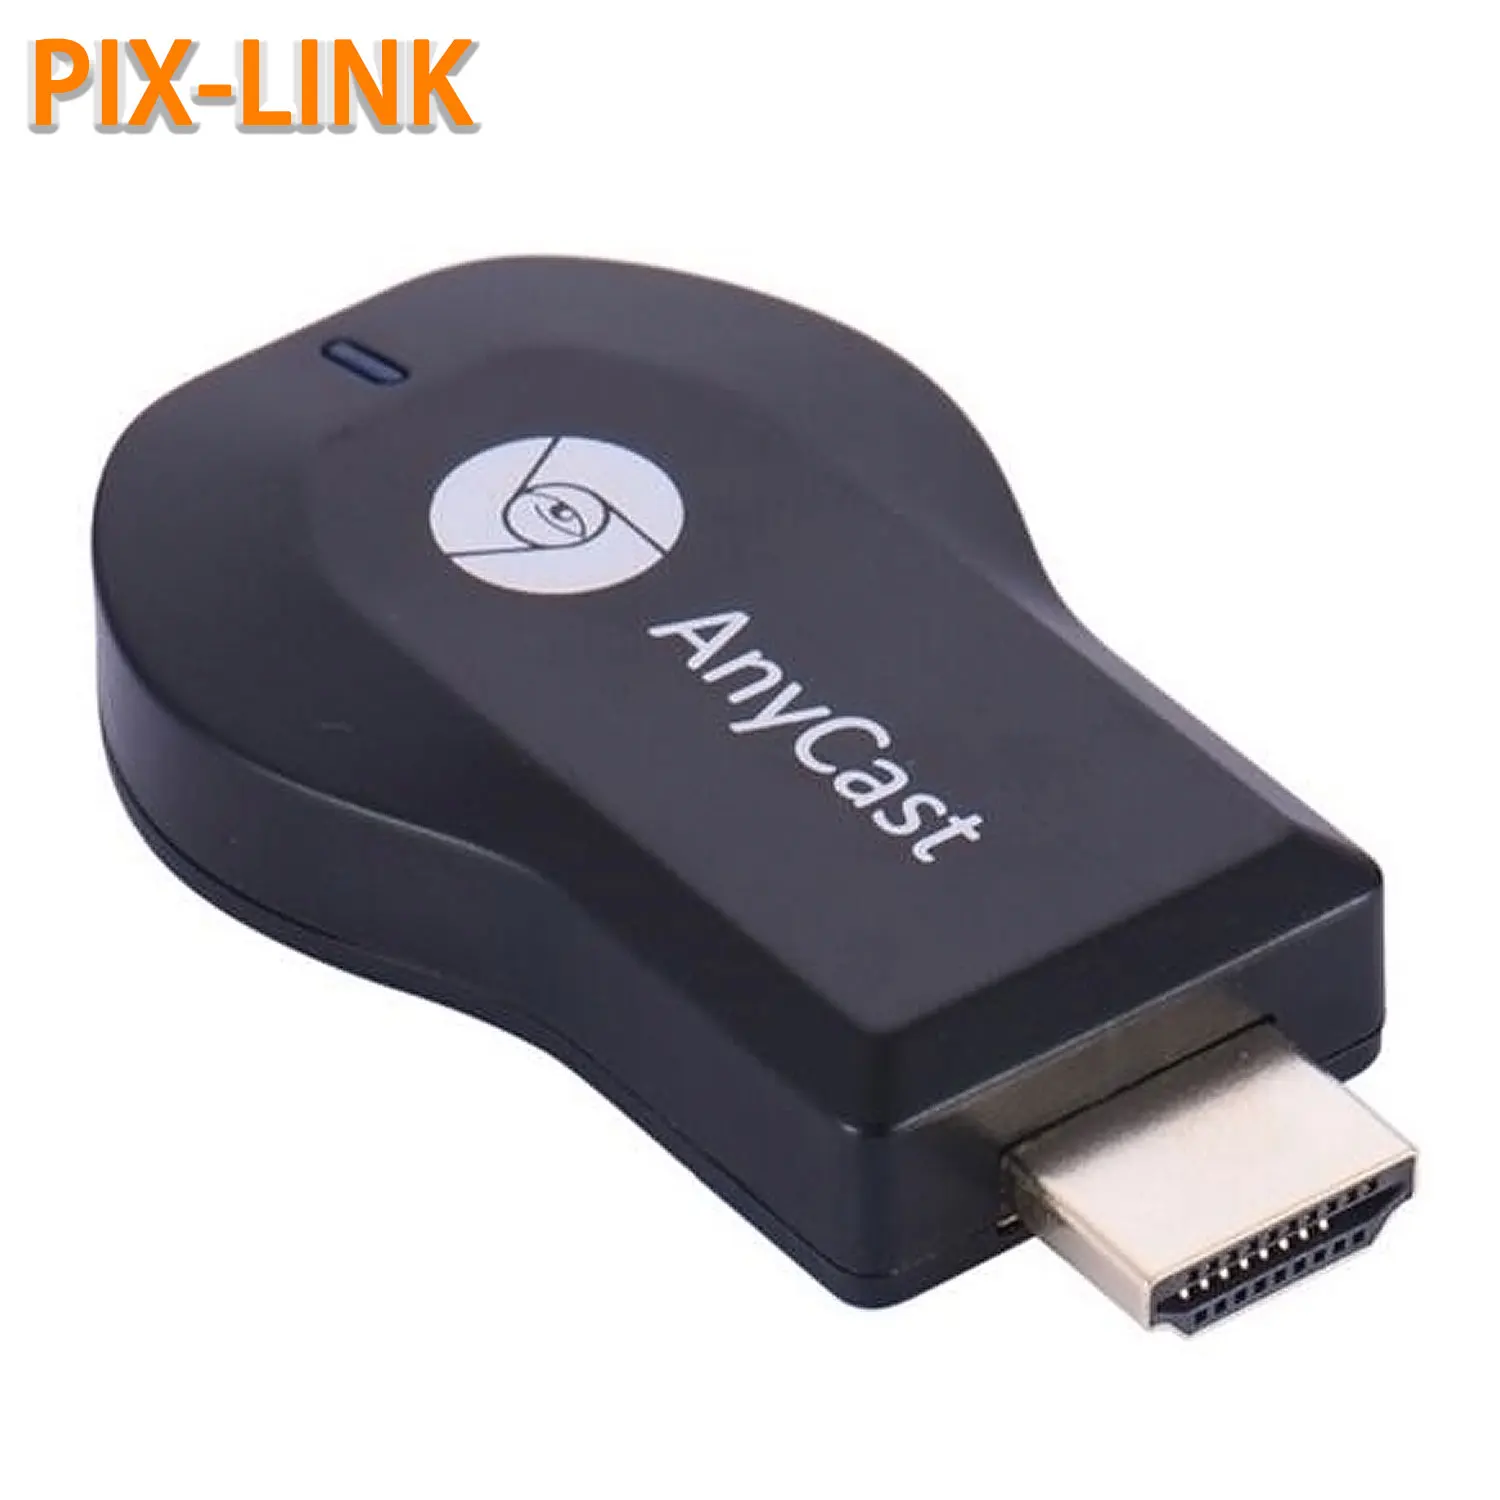 

2.4G Wireless WiFi Display Dongle 4K TV Stick Video Adapter Miracast Airplay DLNA Screen Mirroring Share For iOS Android